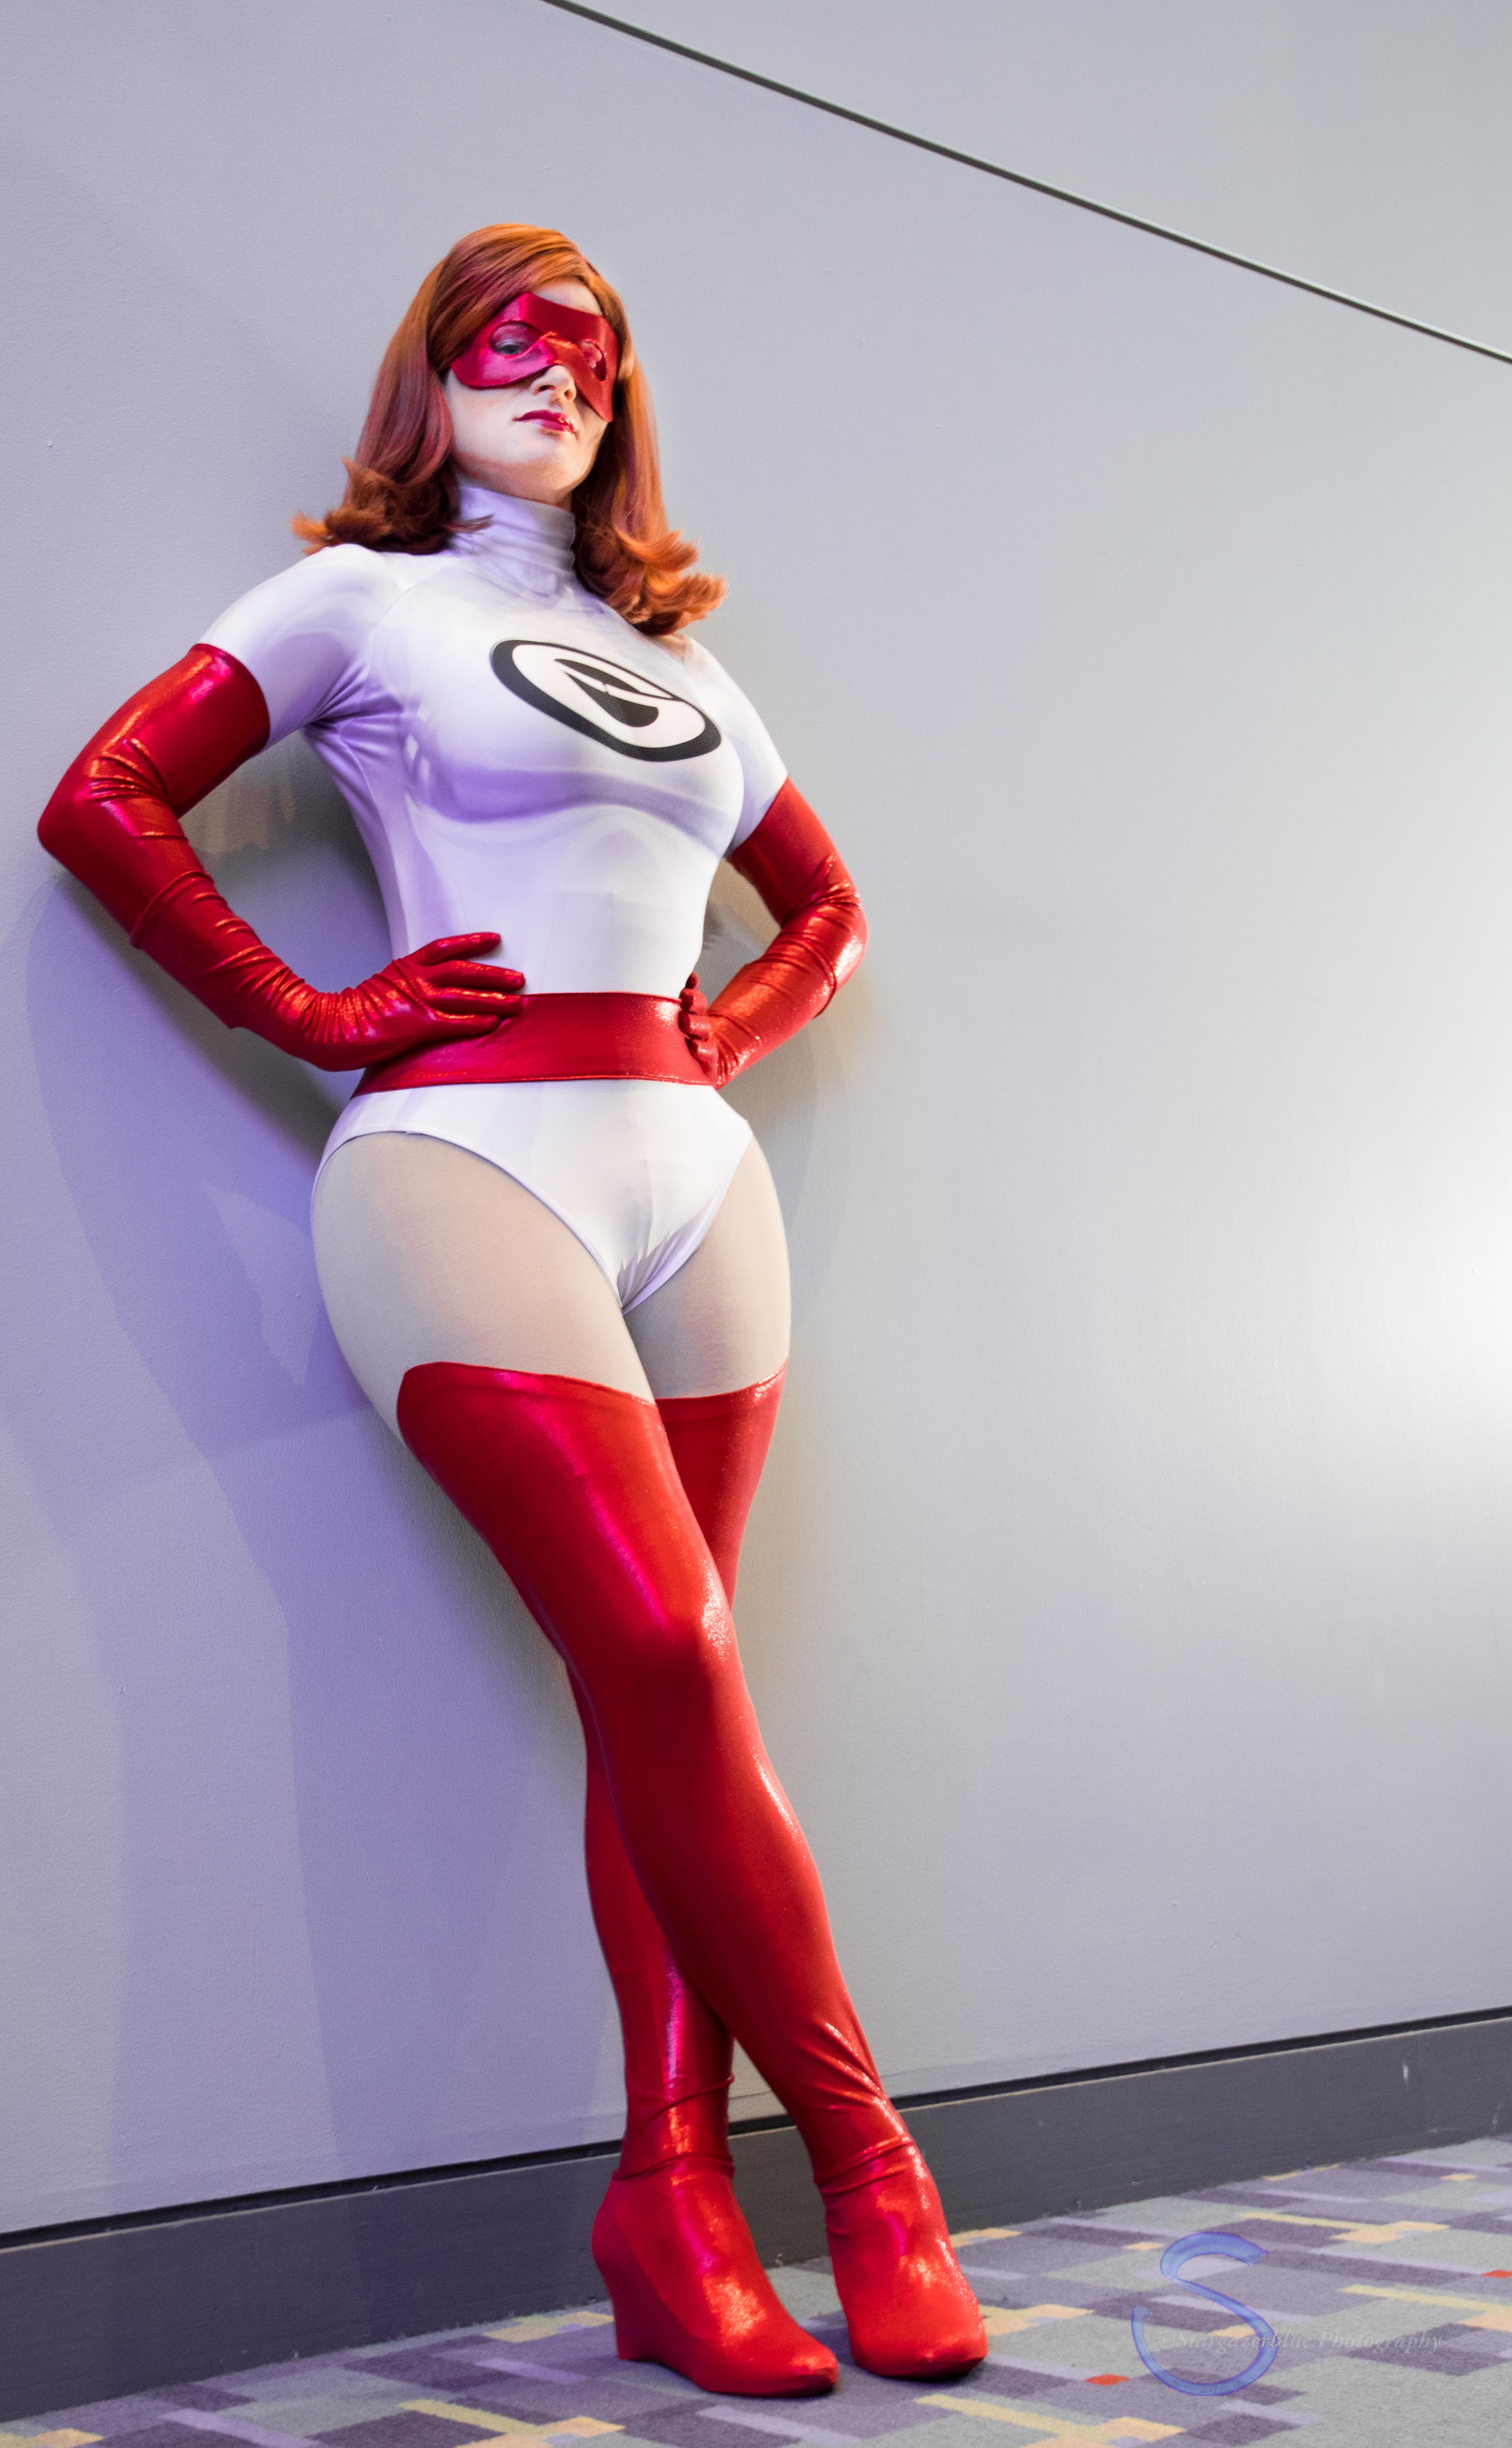 Jay is wearing a cosplay of Elastigirl's classic red and white costume from the Incredibles. She is leaning against a wall with her hands on her hips and her ankles crossed.